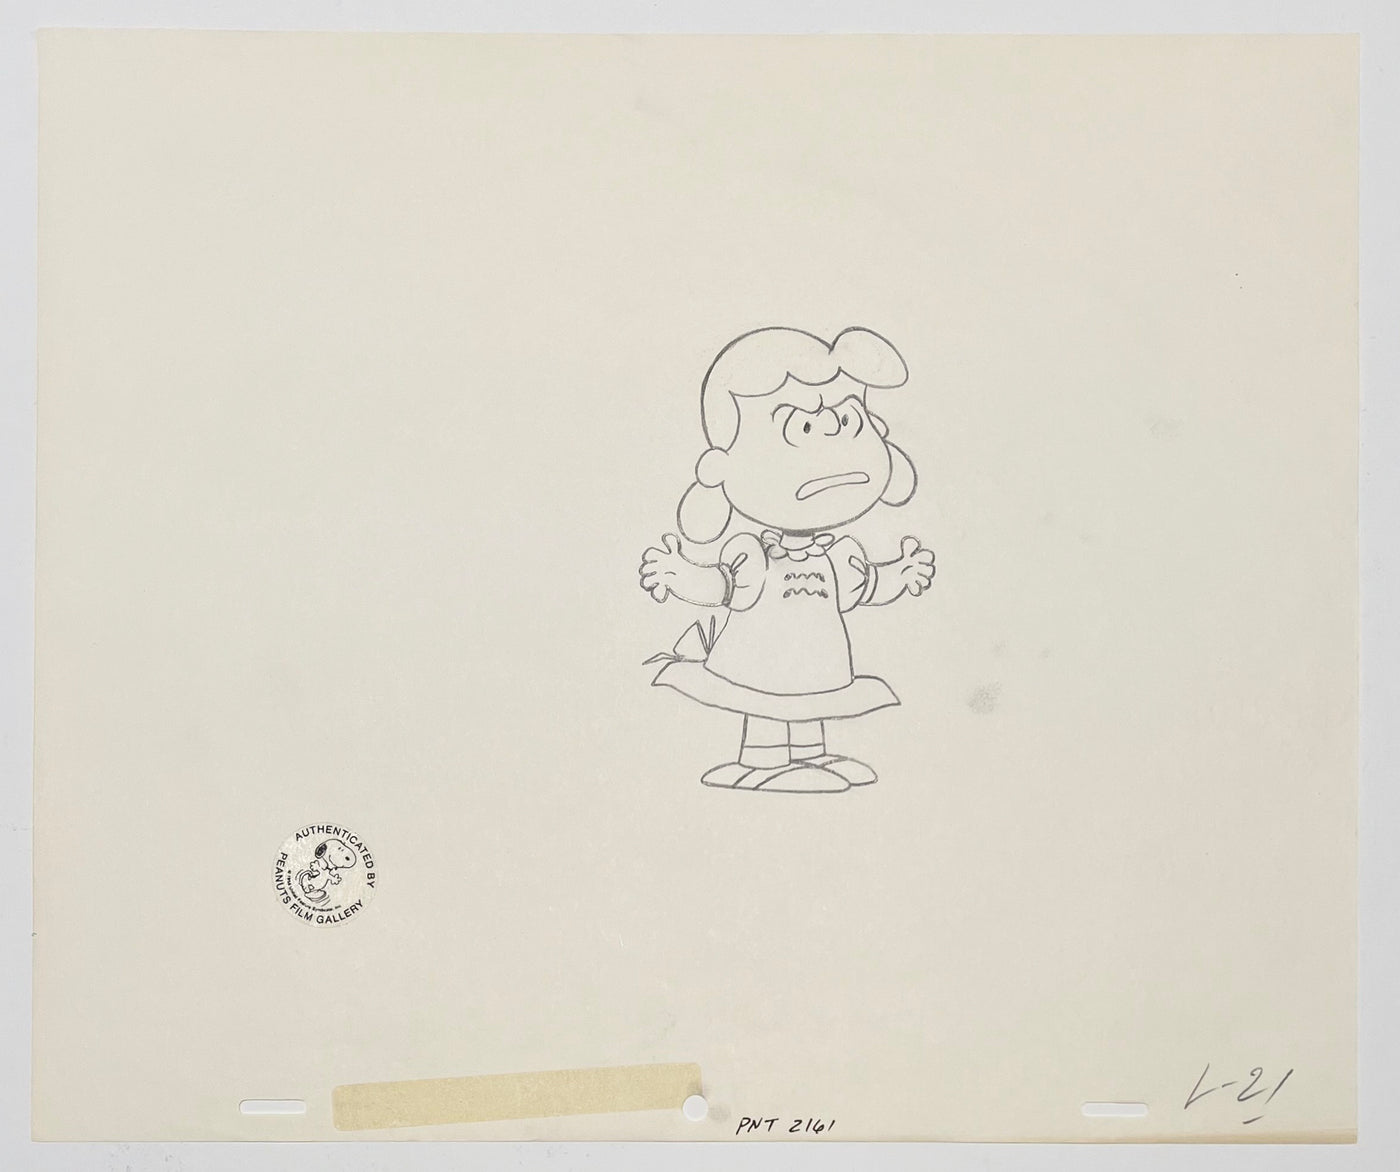 Original Peanuts Production Cel with 2 Production Drawings featuring Lucy, Snoopy, and Woodstock